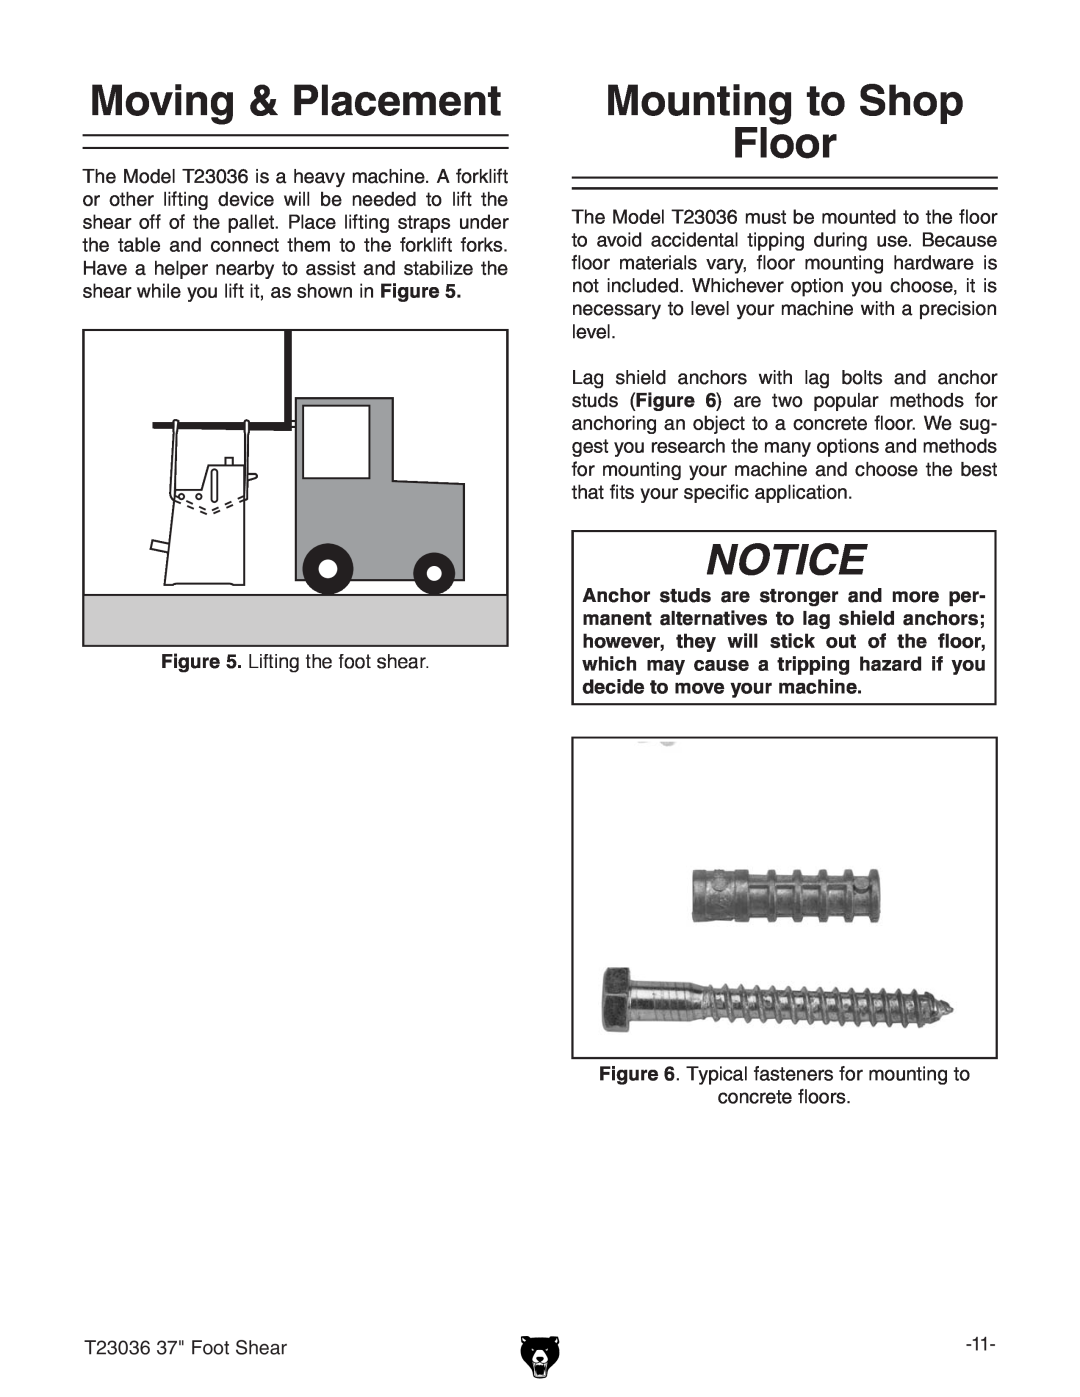 Grizzly T23036 owner manual Moving & Placement, Mounting to Shop Floor 